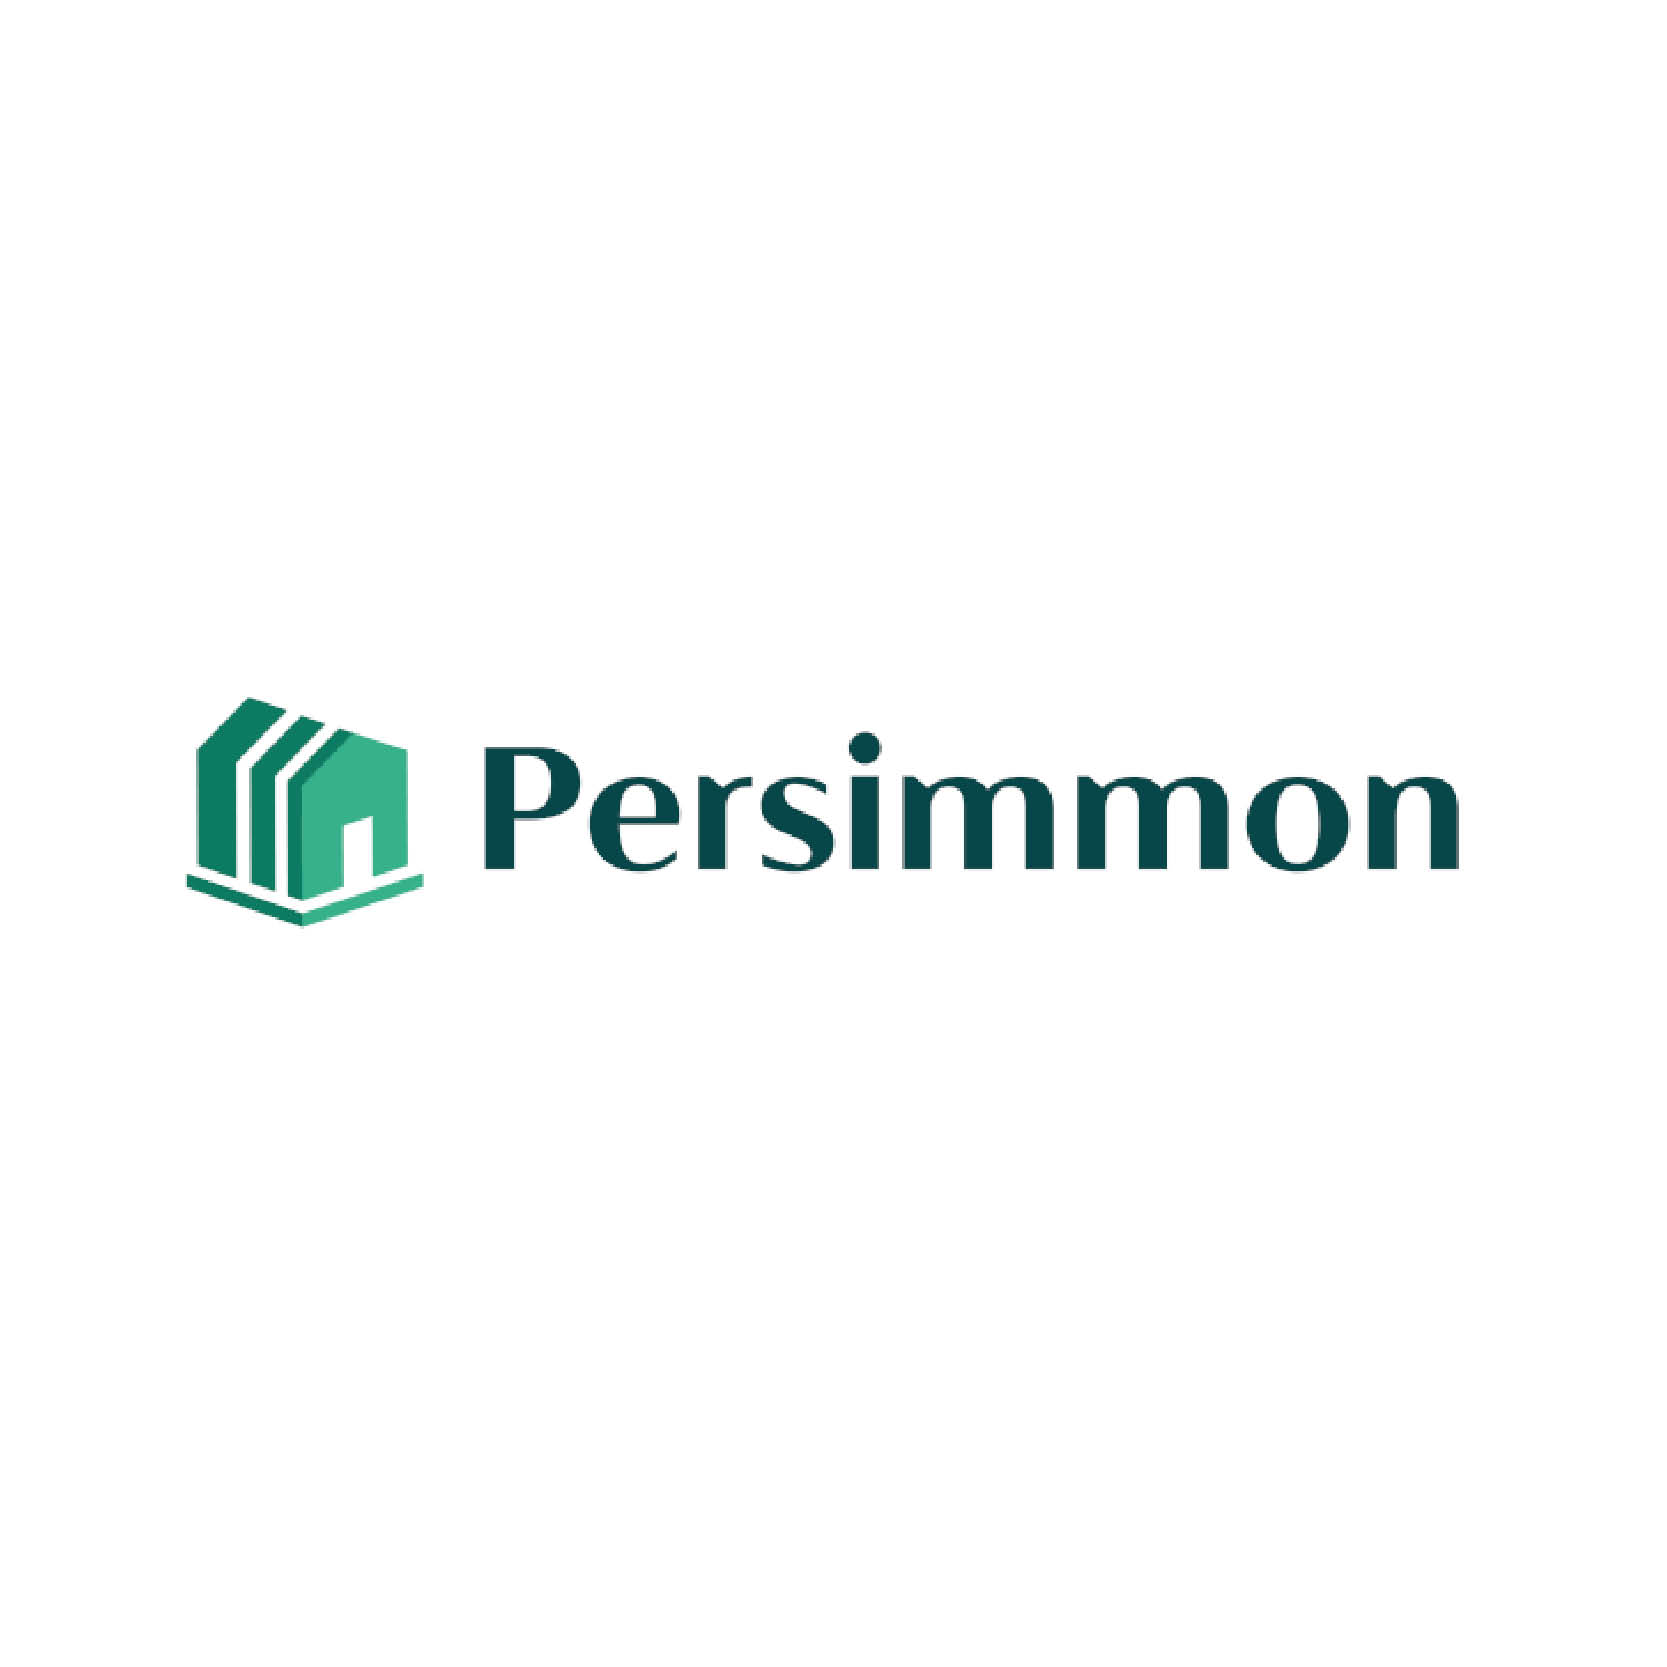 Persimmon shares